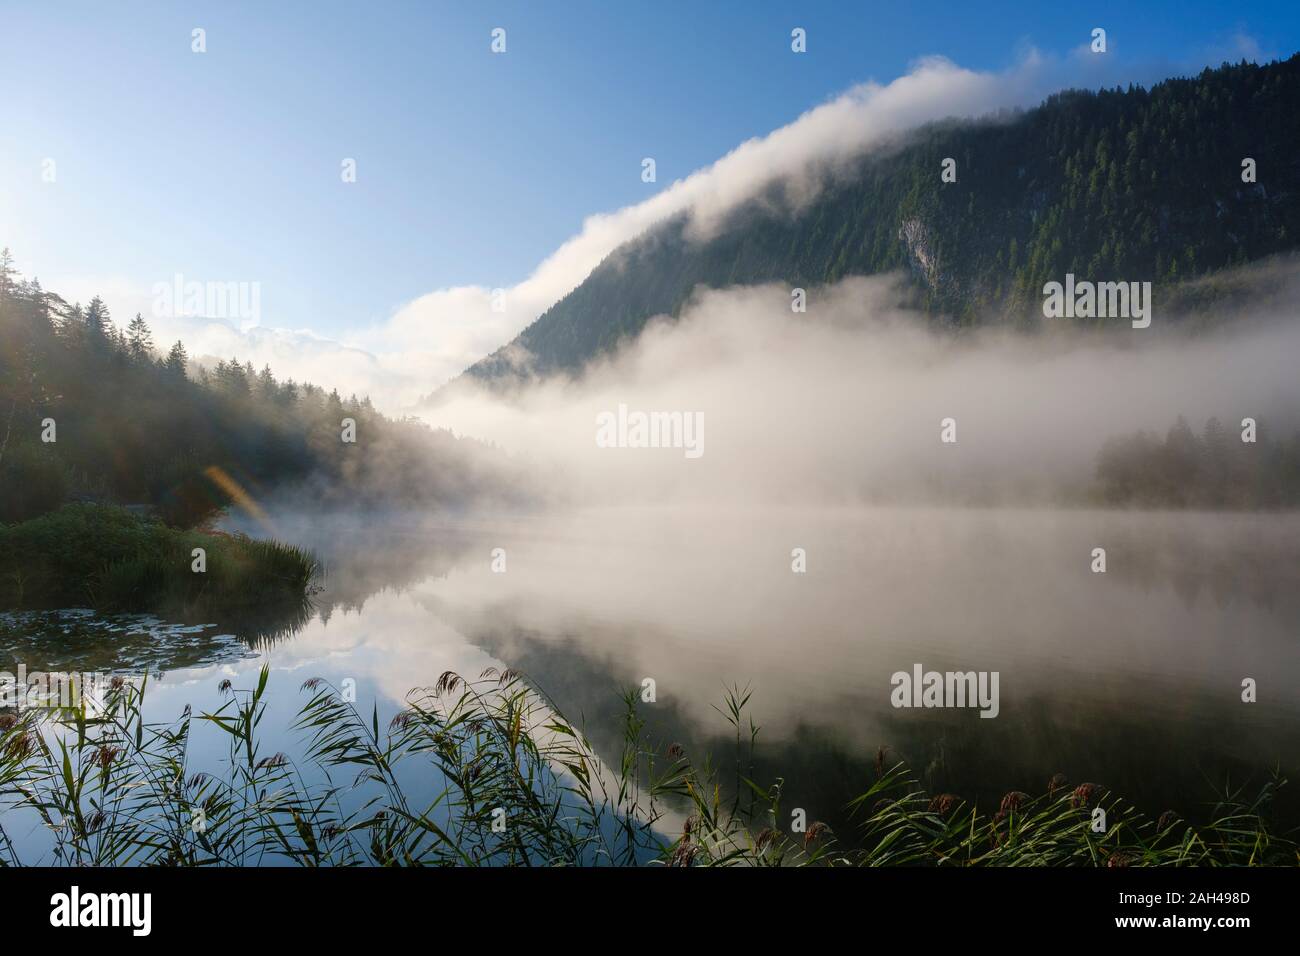 Germany, Bavaria, Mittenwald, Thick fog floating over Ferchensee lake at dawn Stock Photo